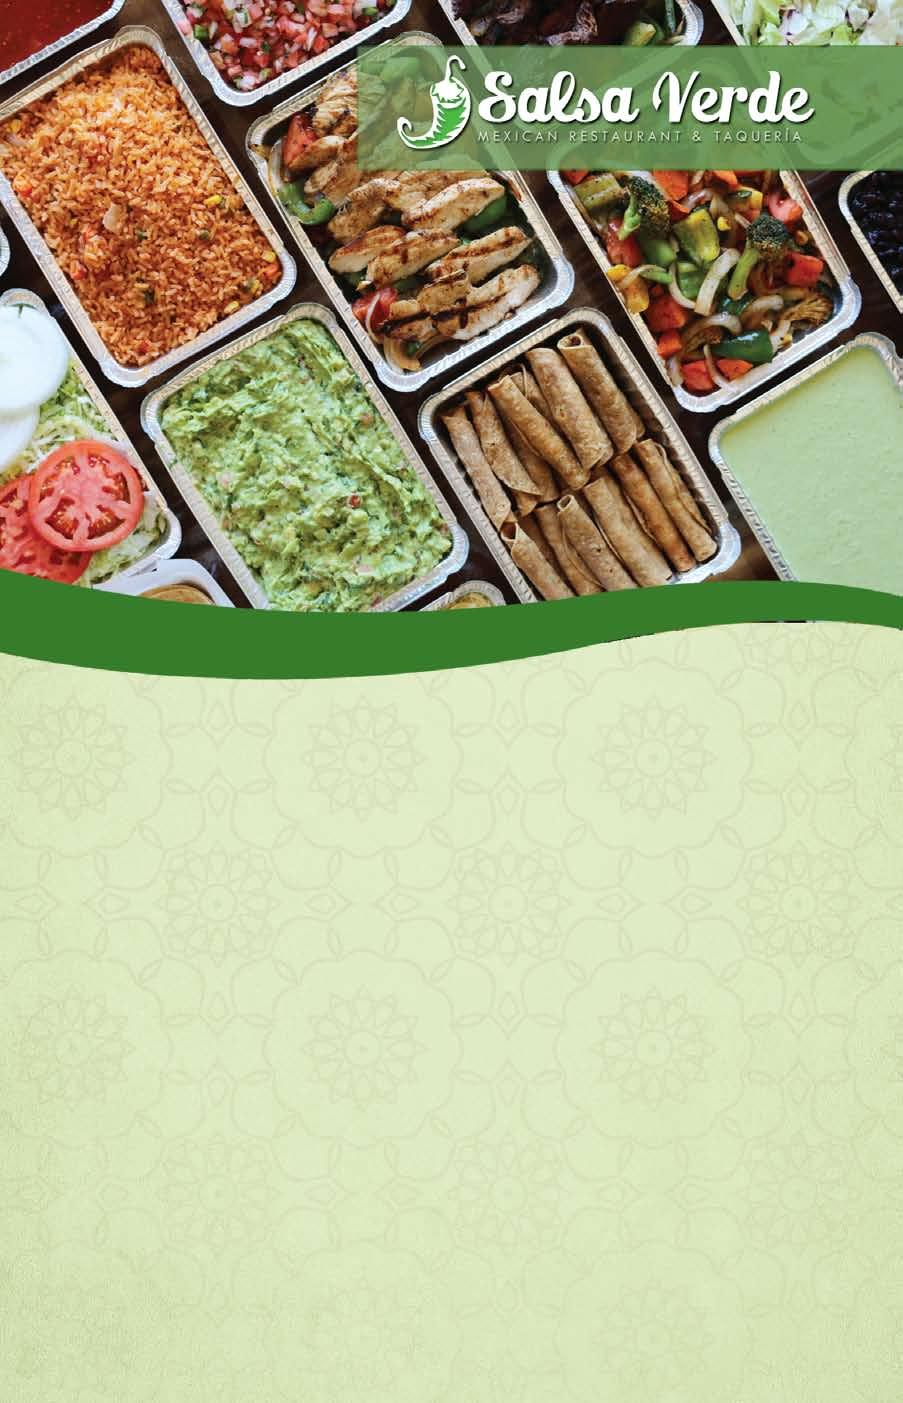 L e t u s c a t e r Salsa Verde Catering: All-inclusive, stress-free and ready to serve!